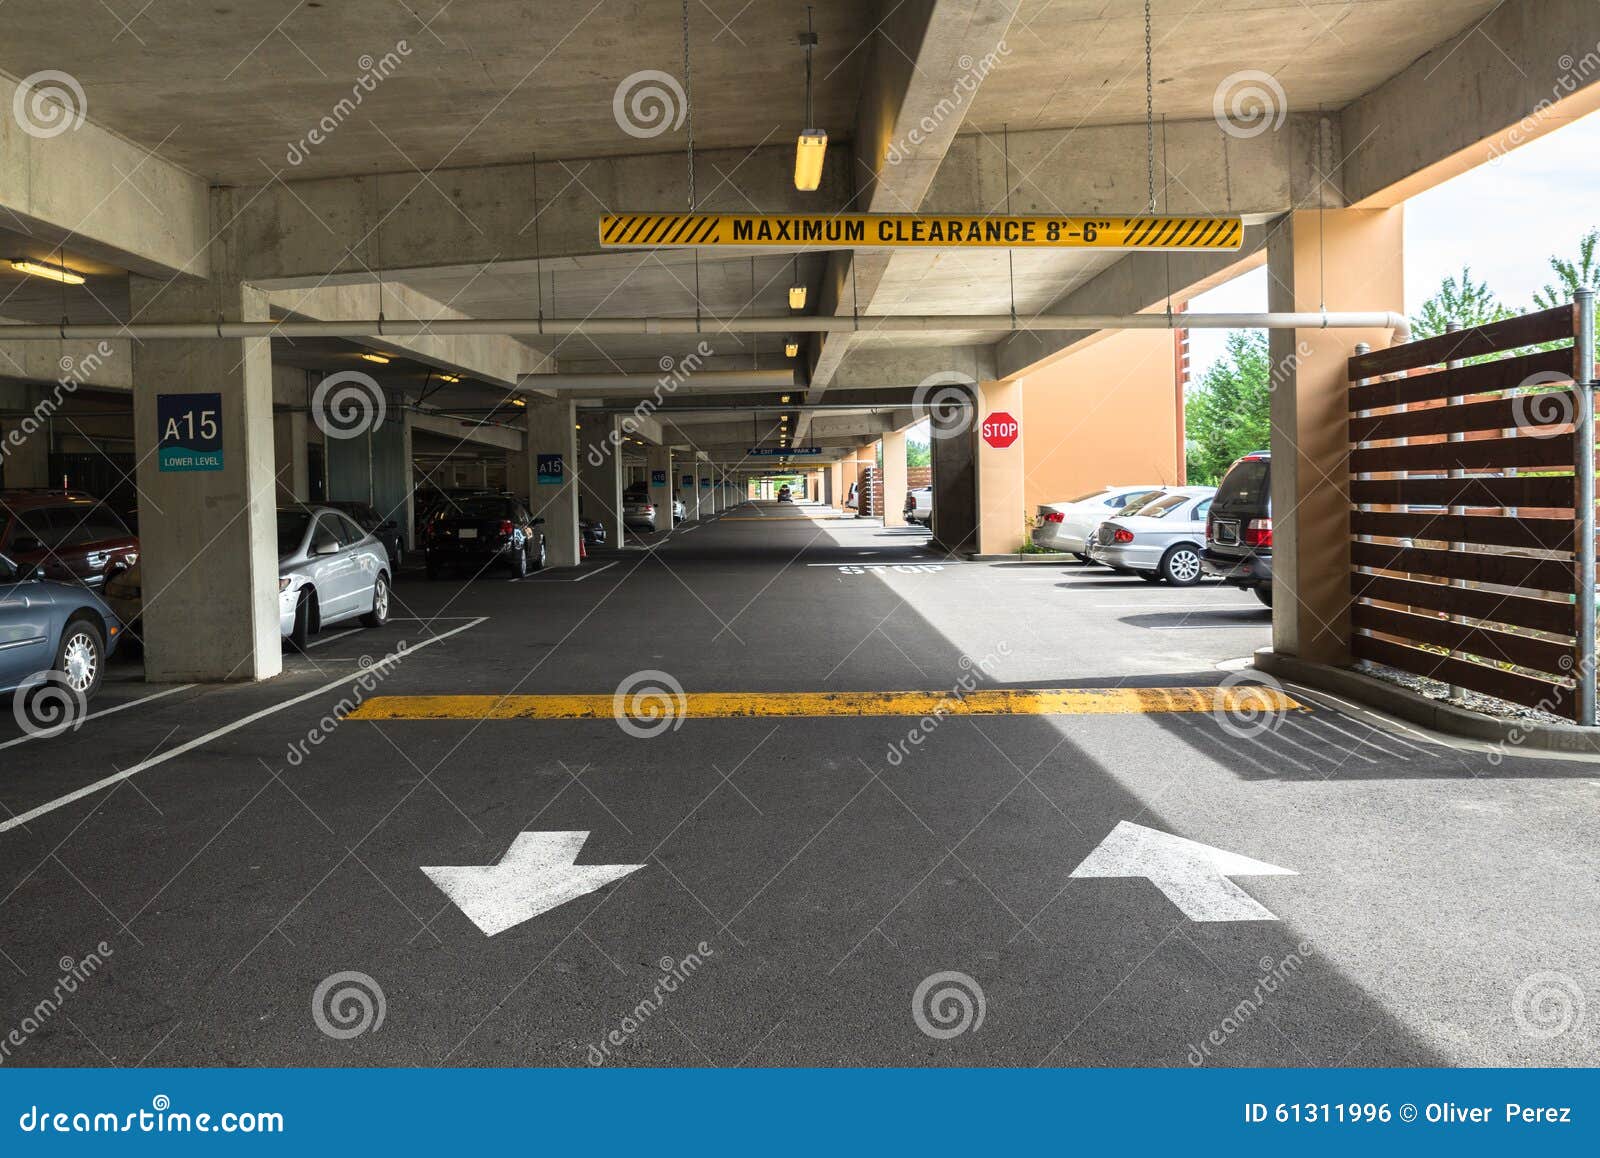 Maximum Clearance stock photo. Image of height, cars - 61311996